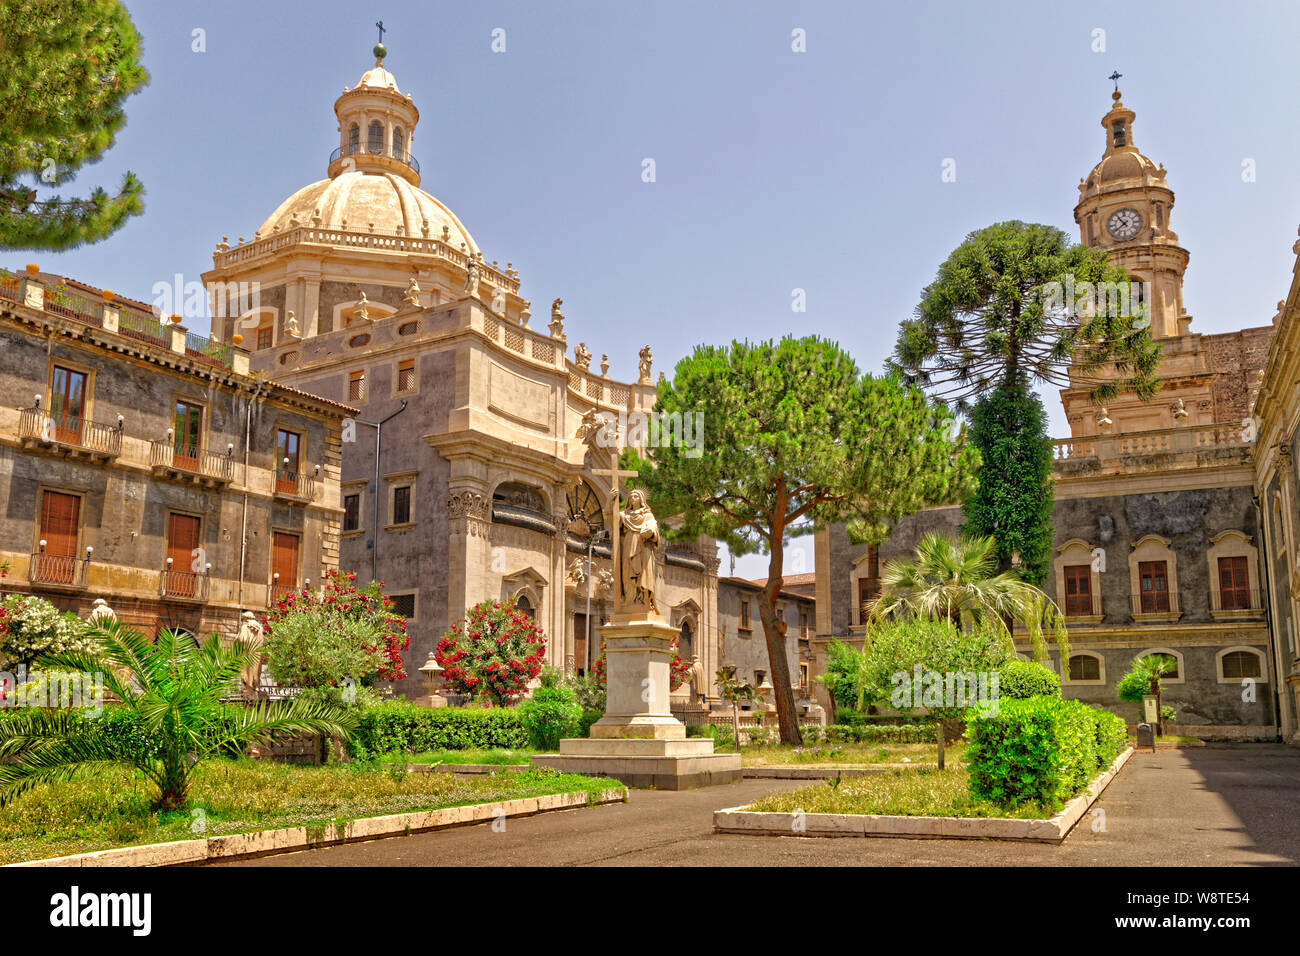 Garden courtyard of St. Agatha's Cathedral and the church of the Abbey of St. Agatha at Catania, Sicily, Italy. Stock Photo